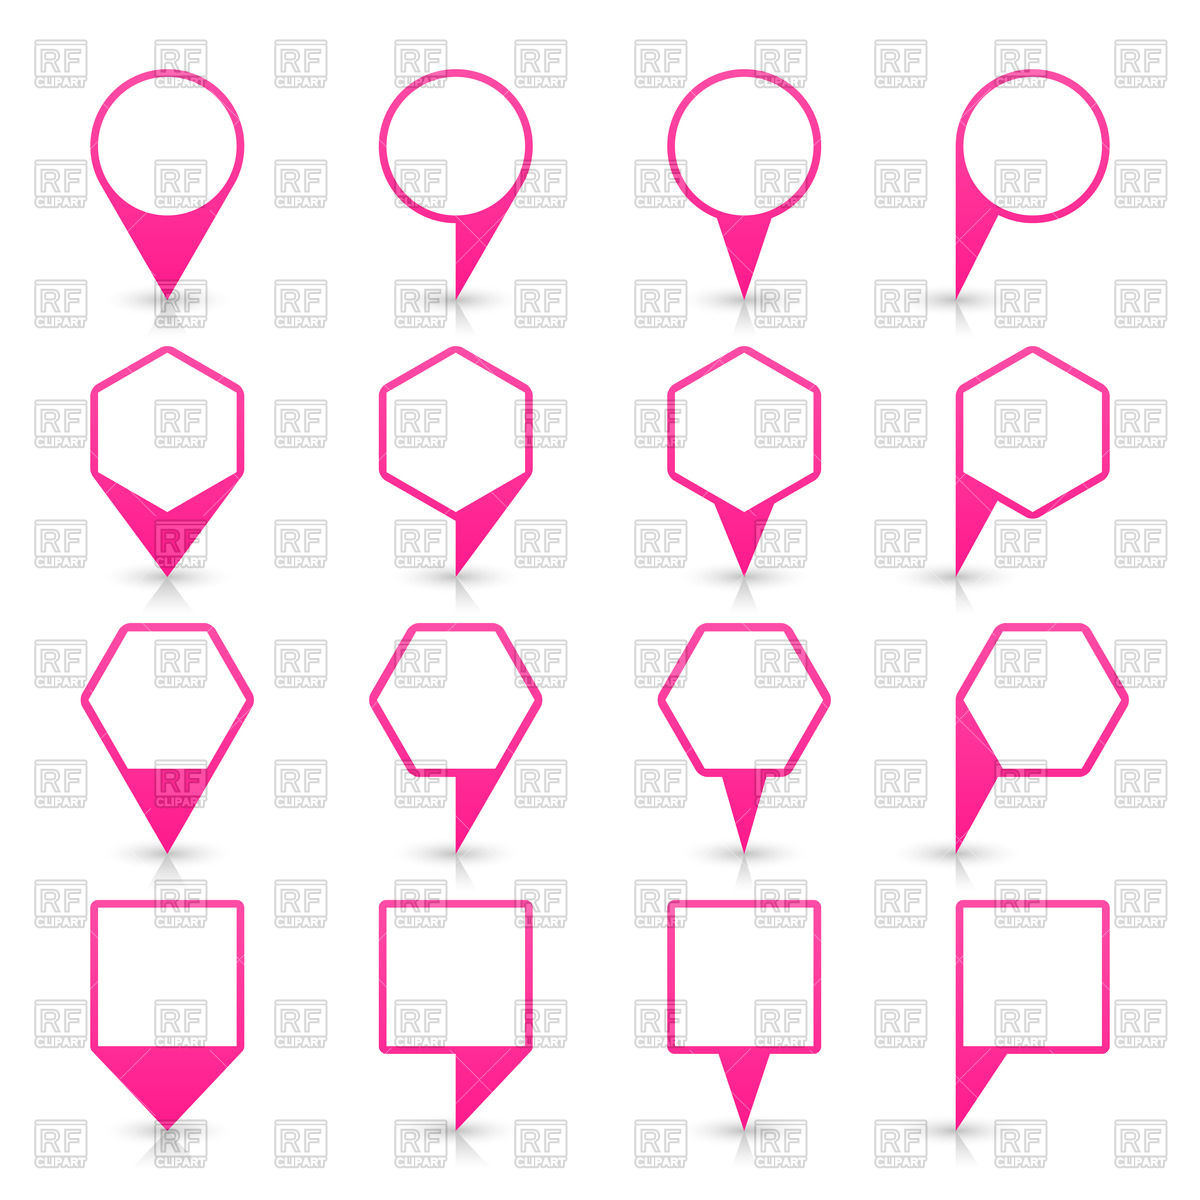 Pink Map Pins Of Different Shapes  Round Square And Hexagon 49883